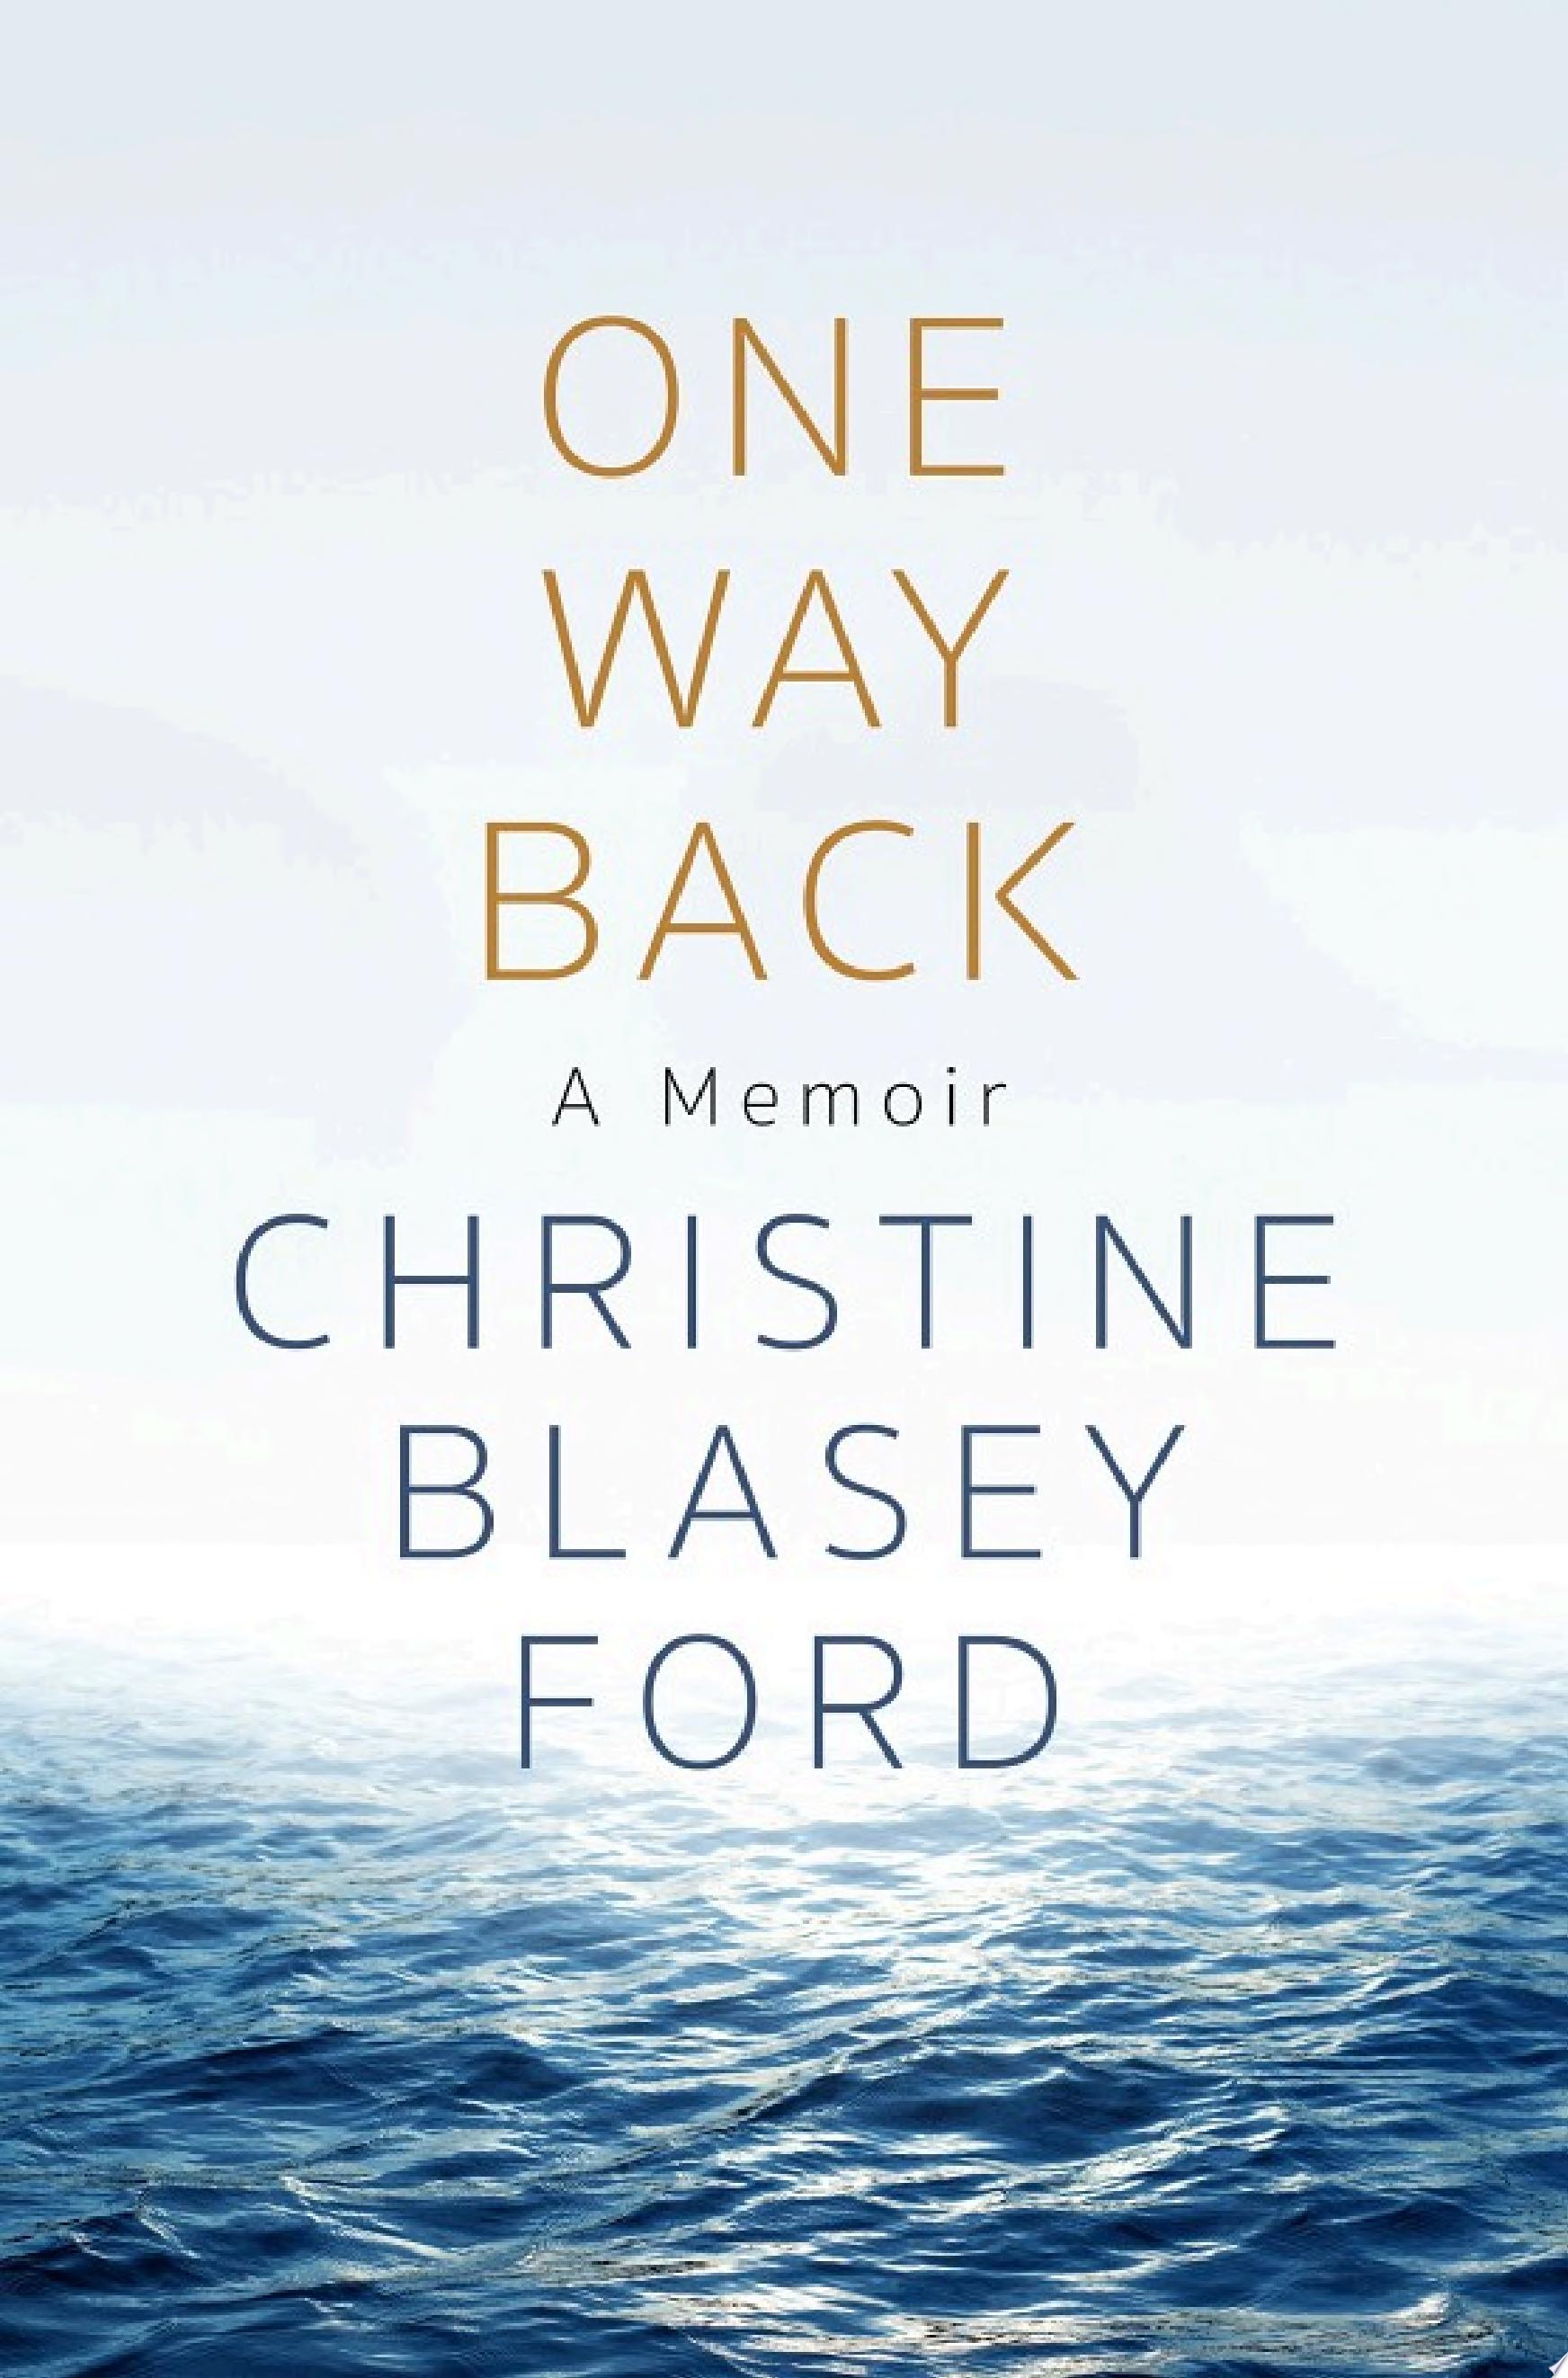 Image for "One Way Back"